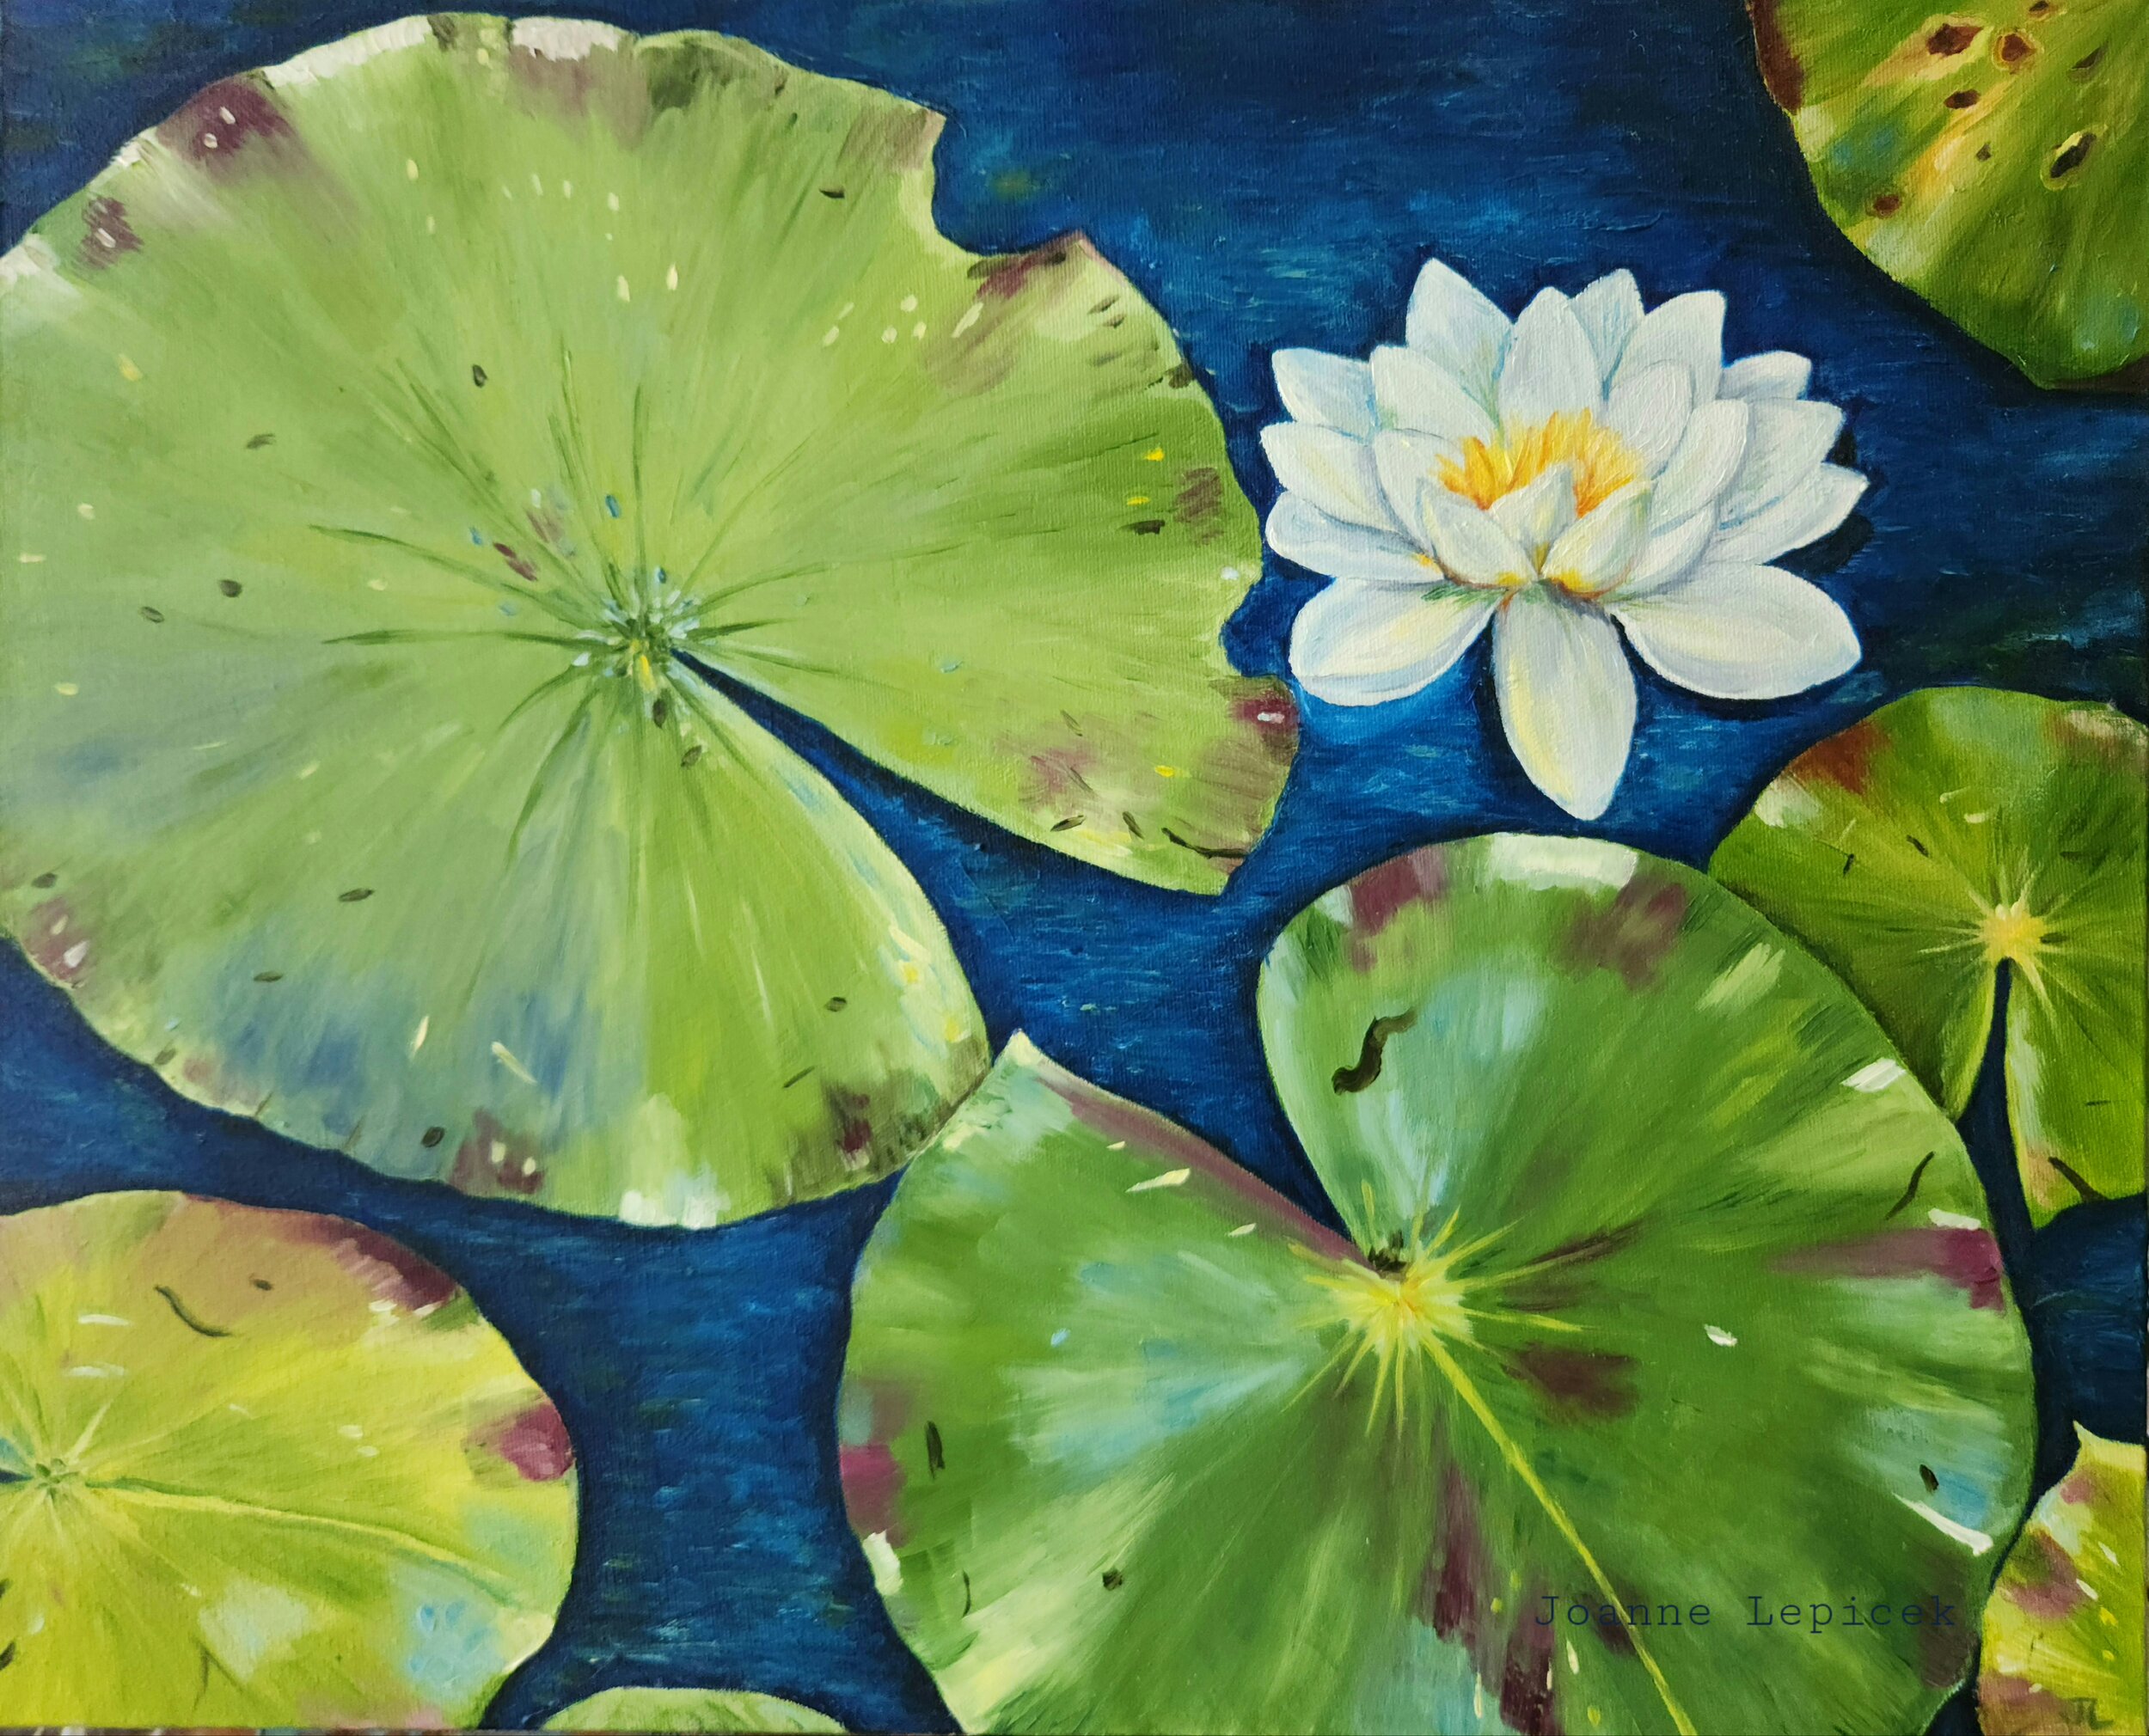 Original 16x20 oil on canvas of lily pads - Where the Lily Pads Gather  by Joanne Lepicek — Joanne Lepicek Art